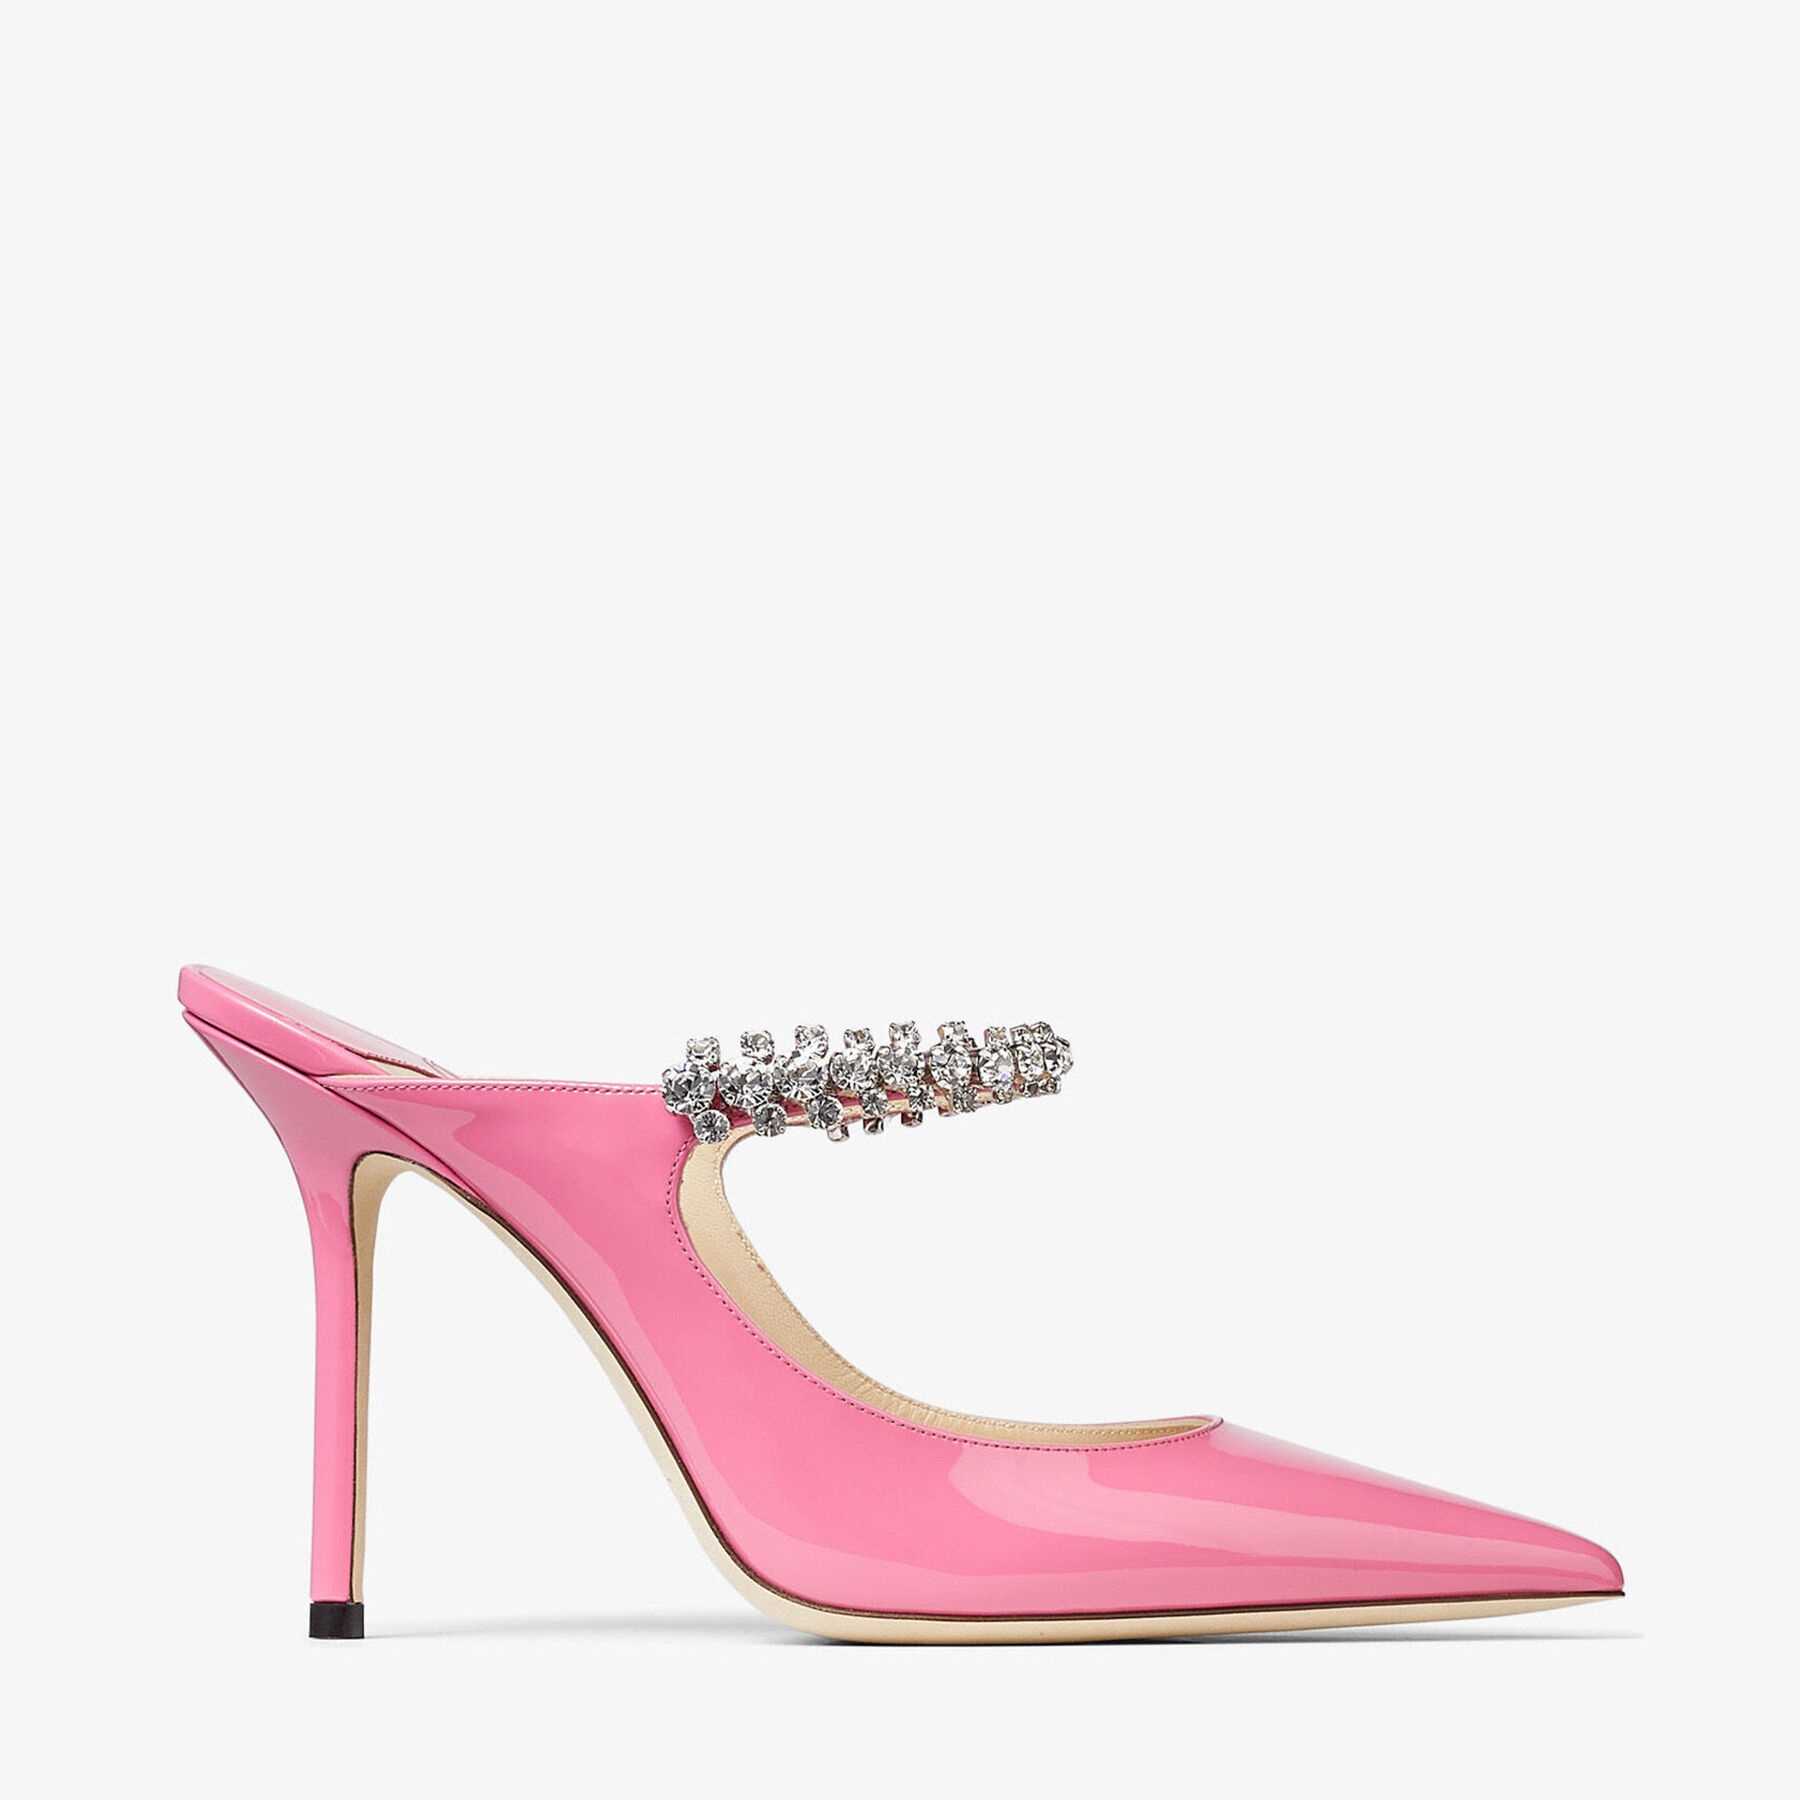 Bing 100
Candy Pink Patent Leather Pumps with Crystal Strap - 1